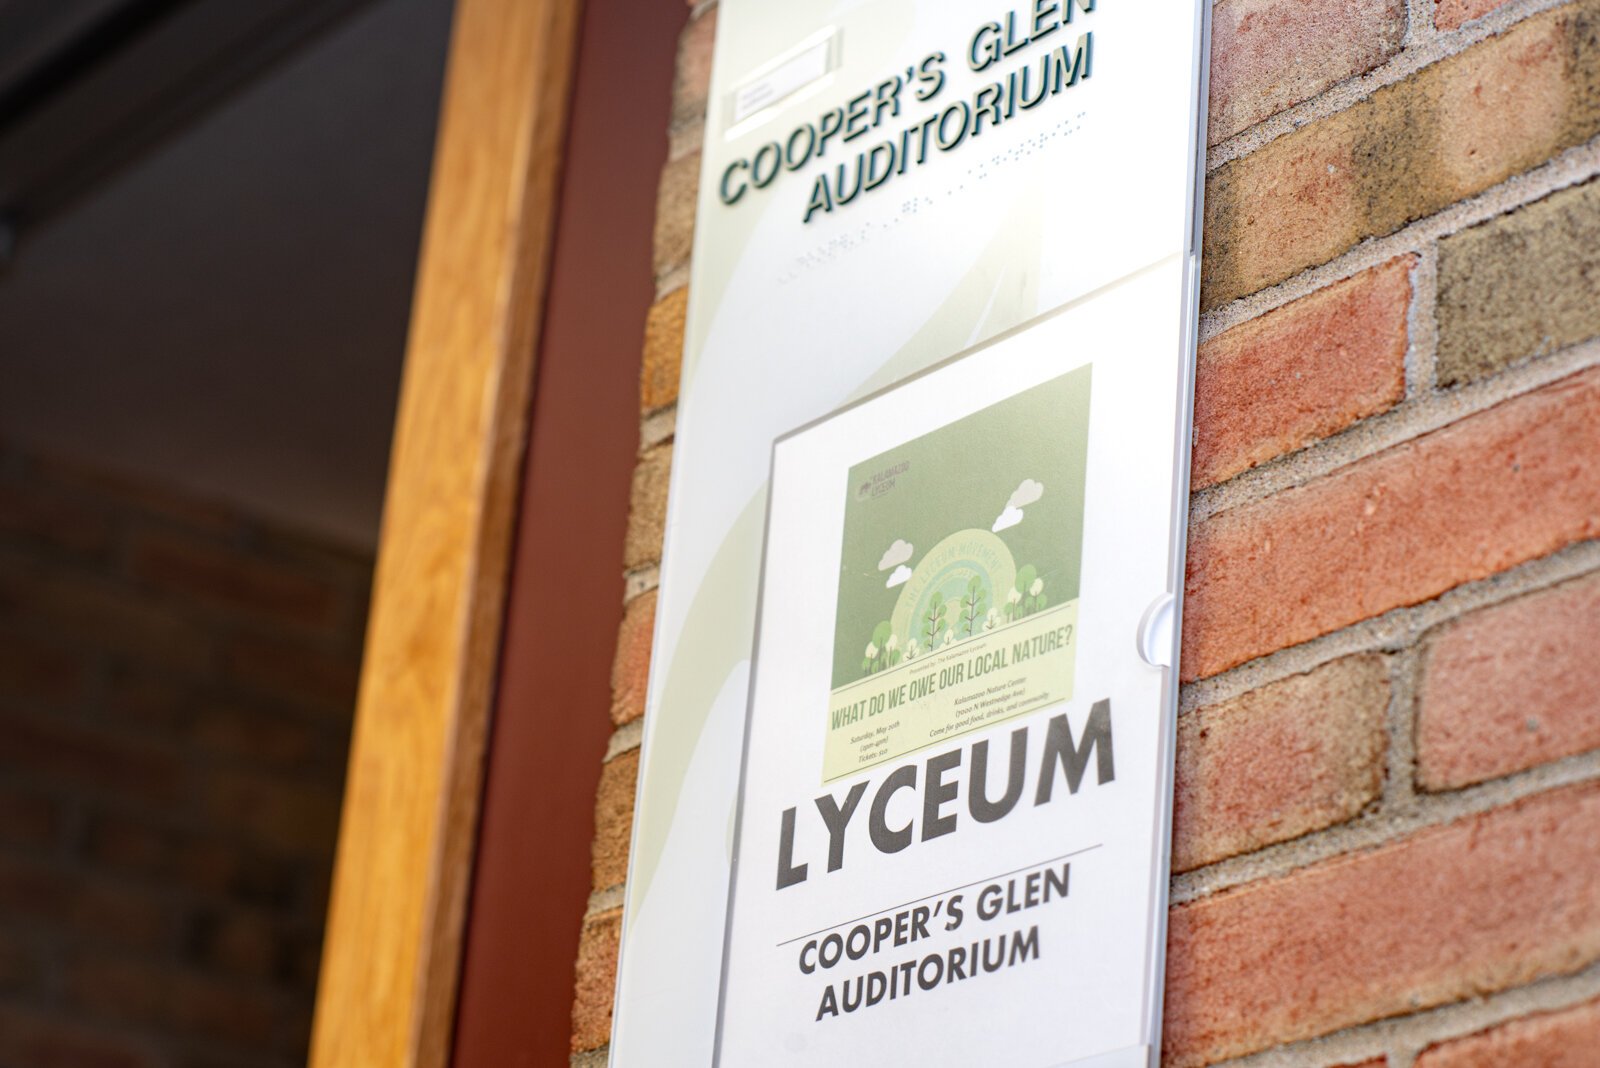 The third Kalamazoo Lyceum, held in Cooper's Glen Auditorium of the Kalamazoo Nature Center, focused on the theme of nature.